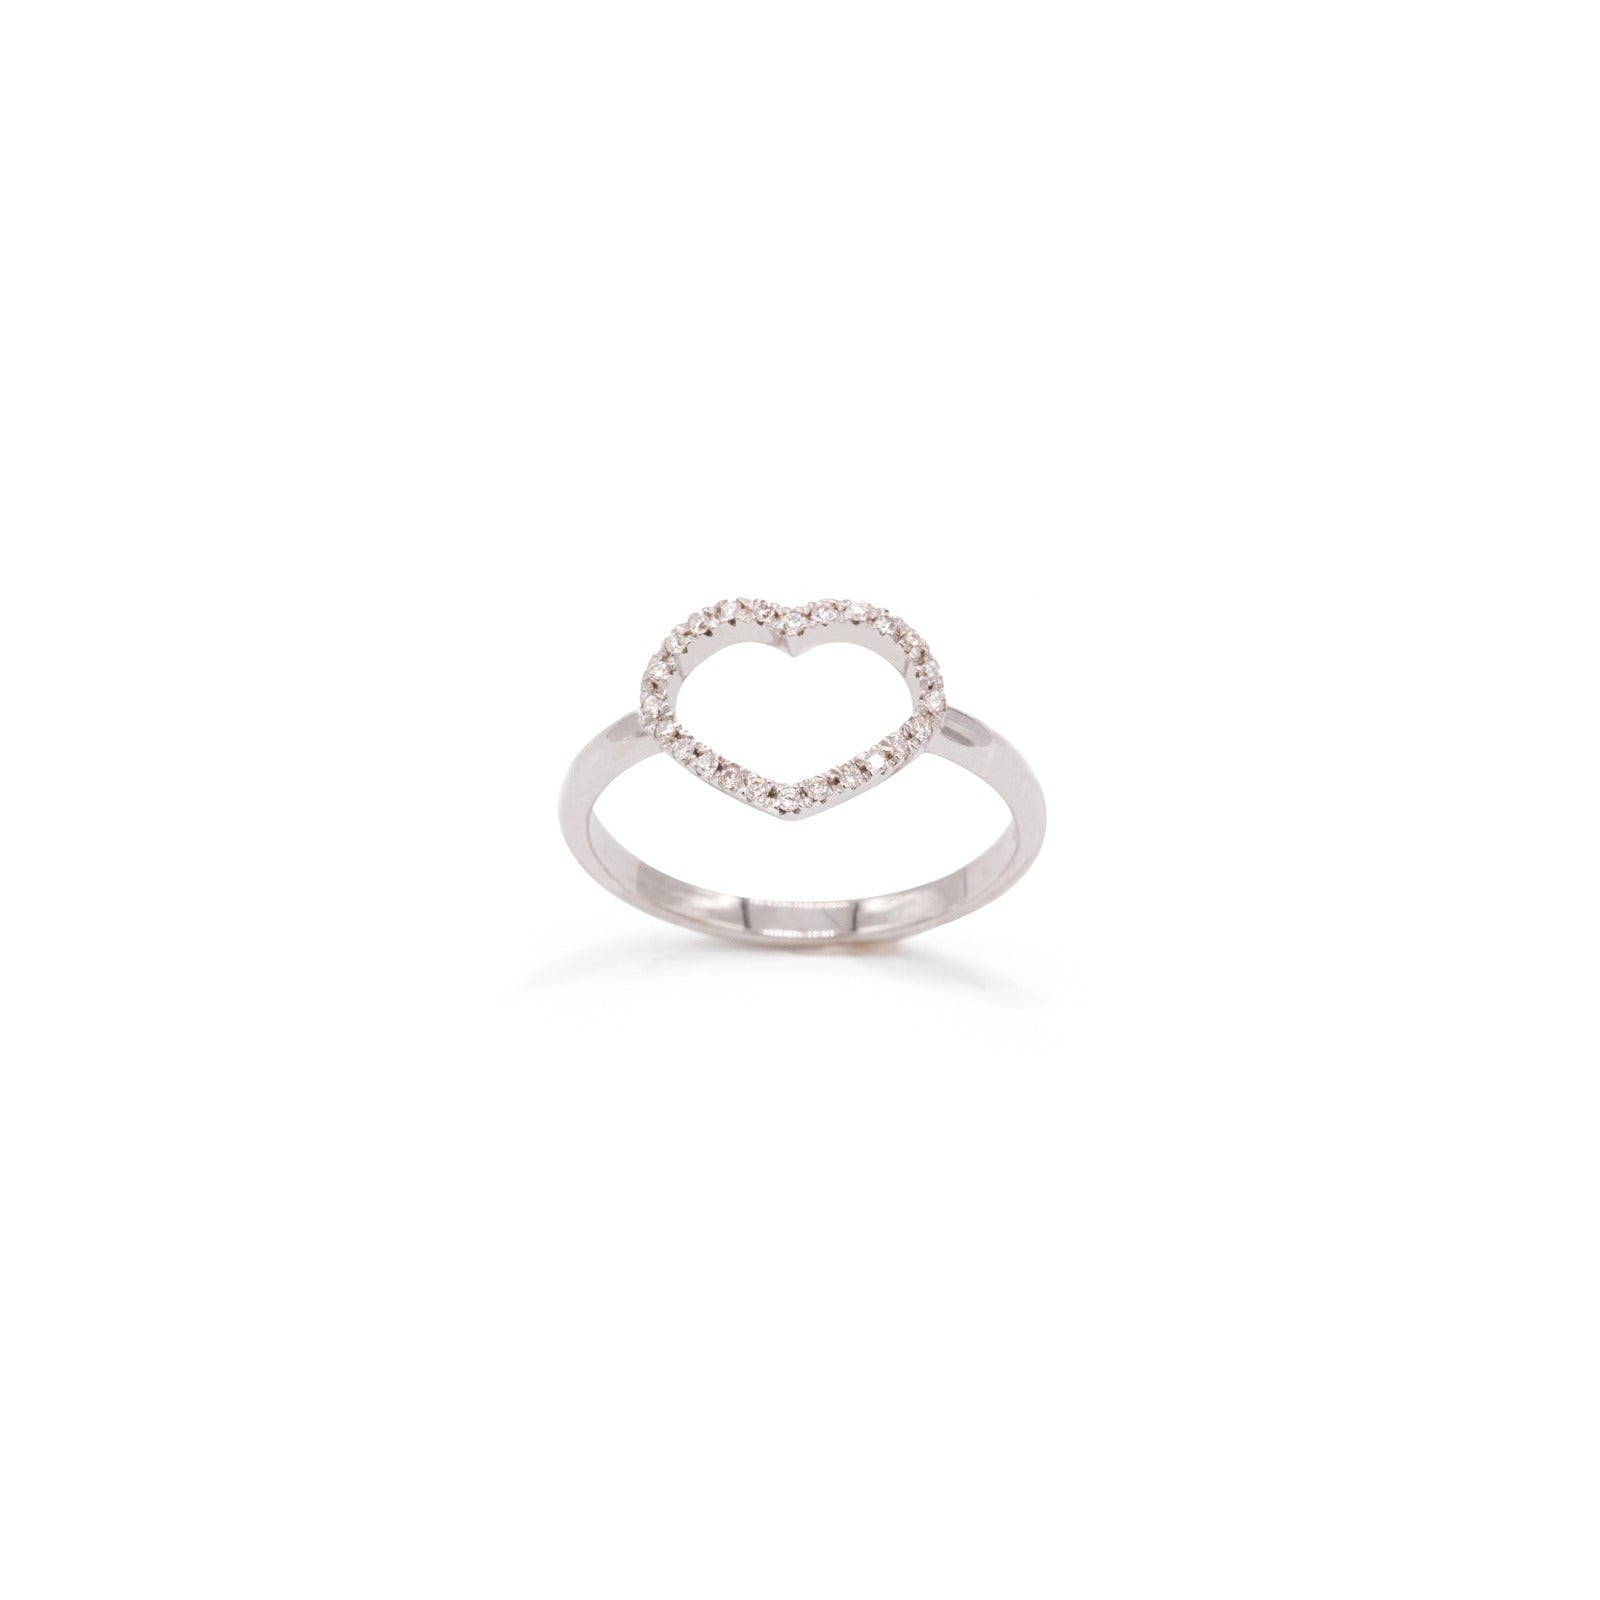 Heart shape ring in white gold and diamonds